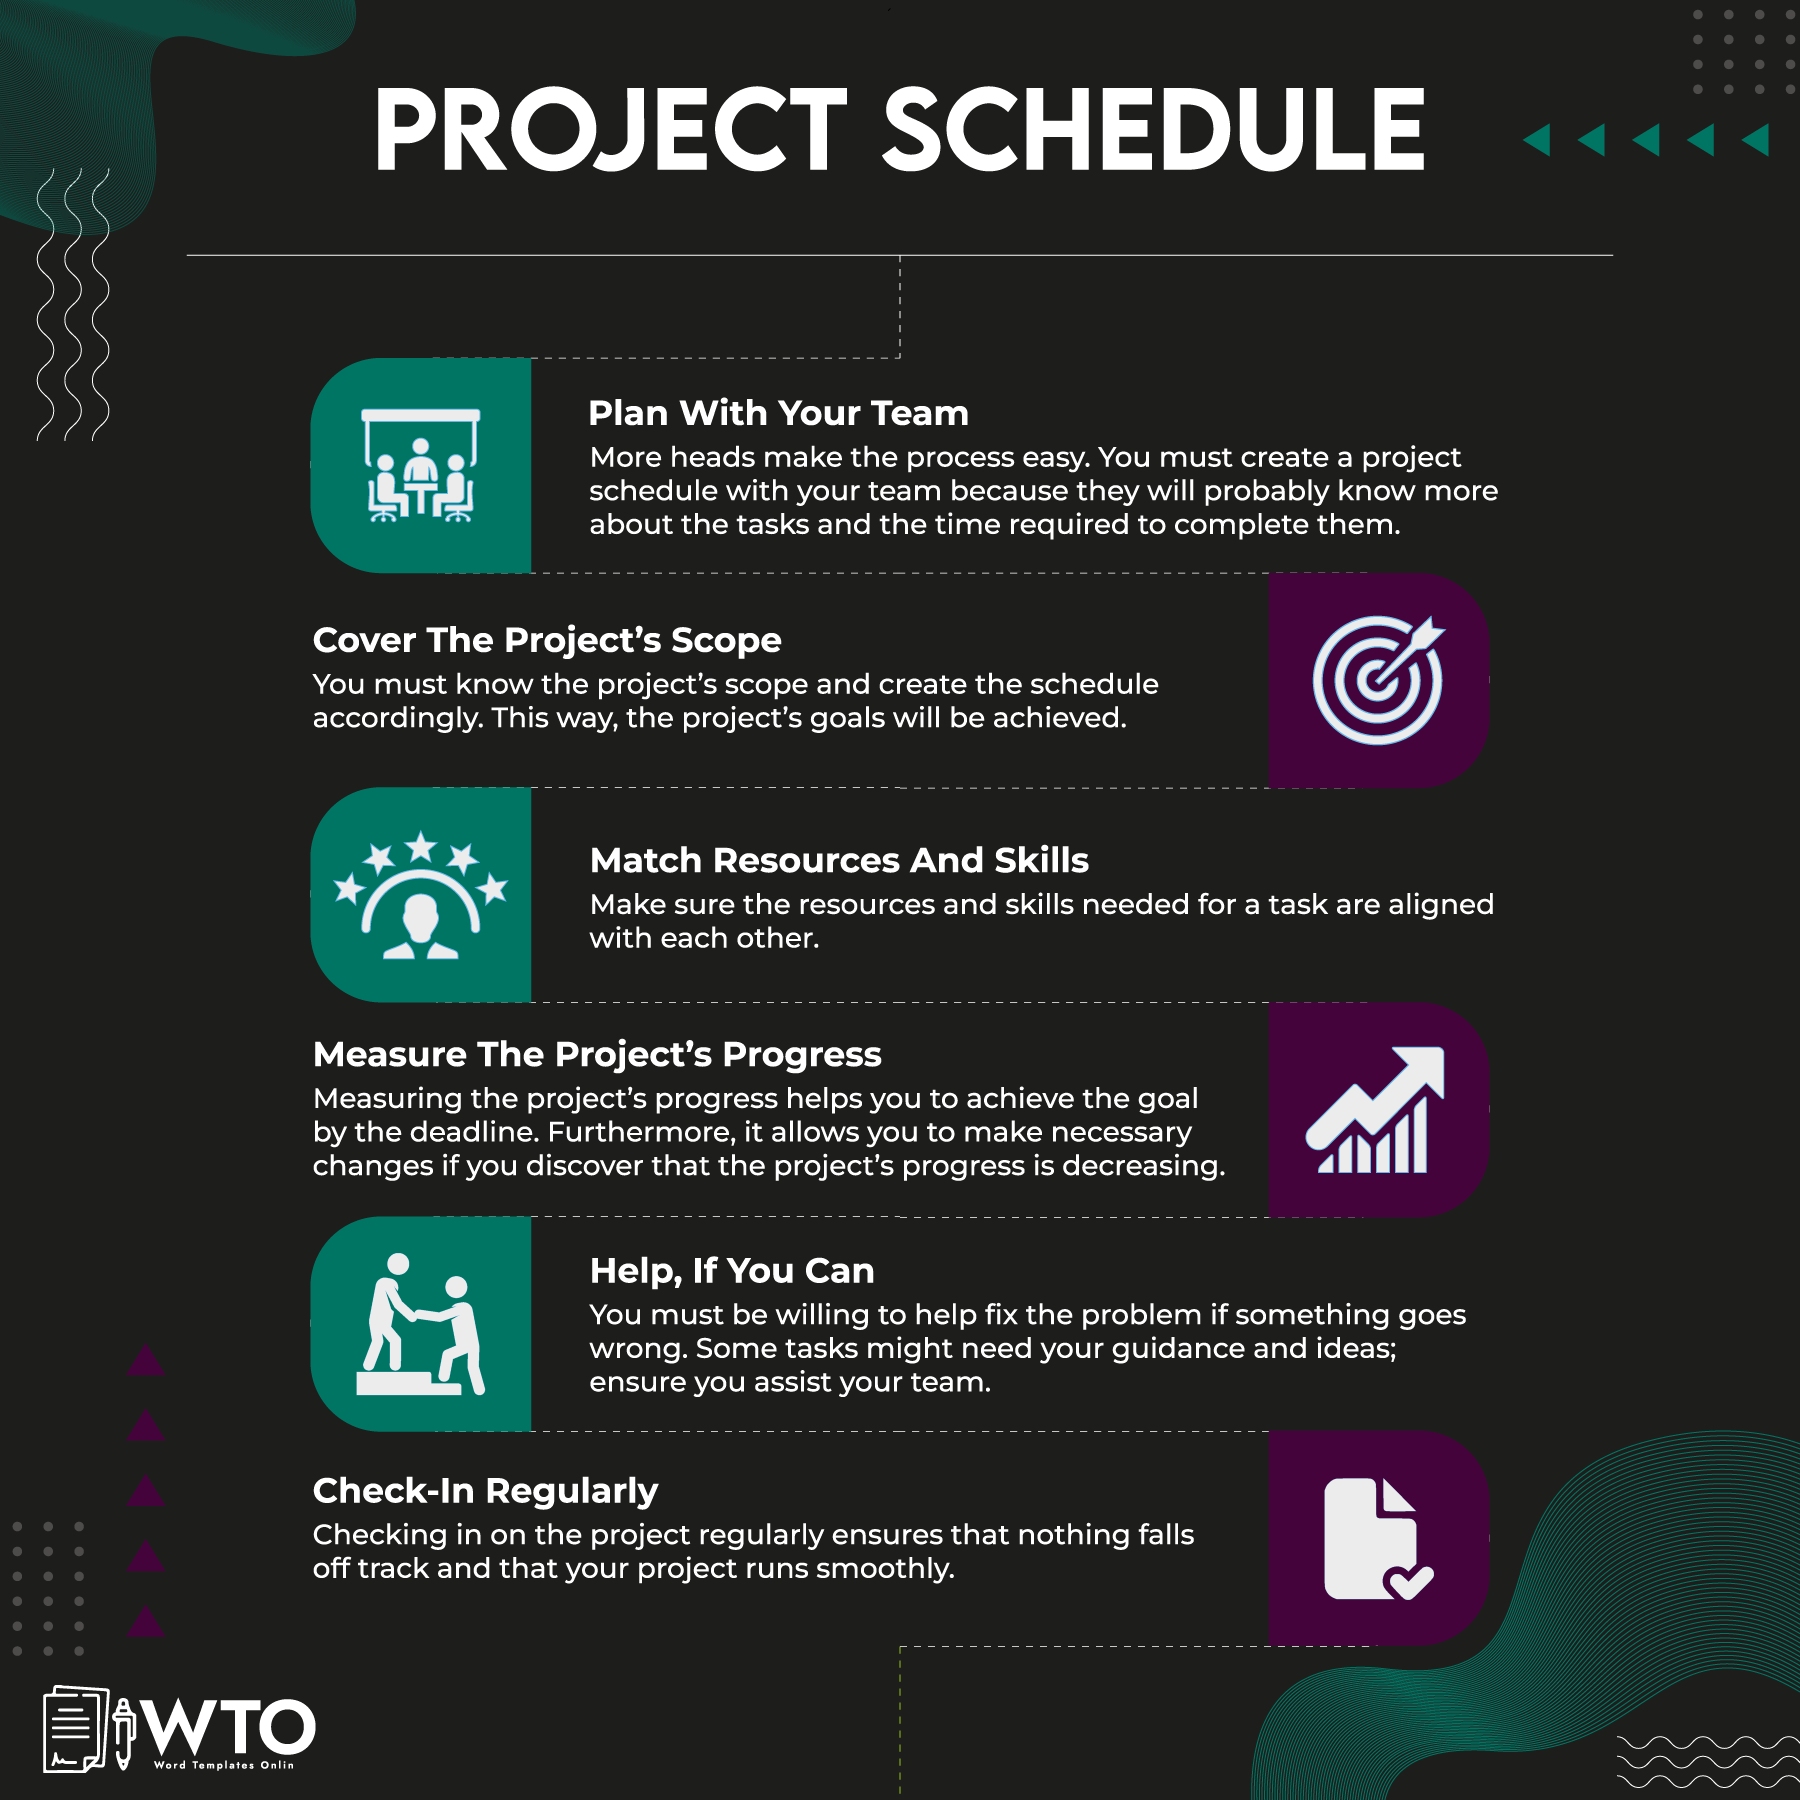 This infographic is about tips for project schedule.